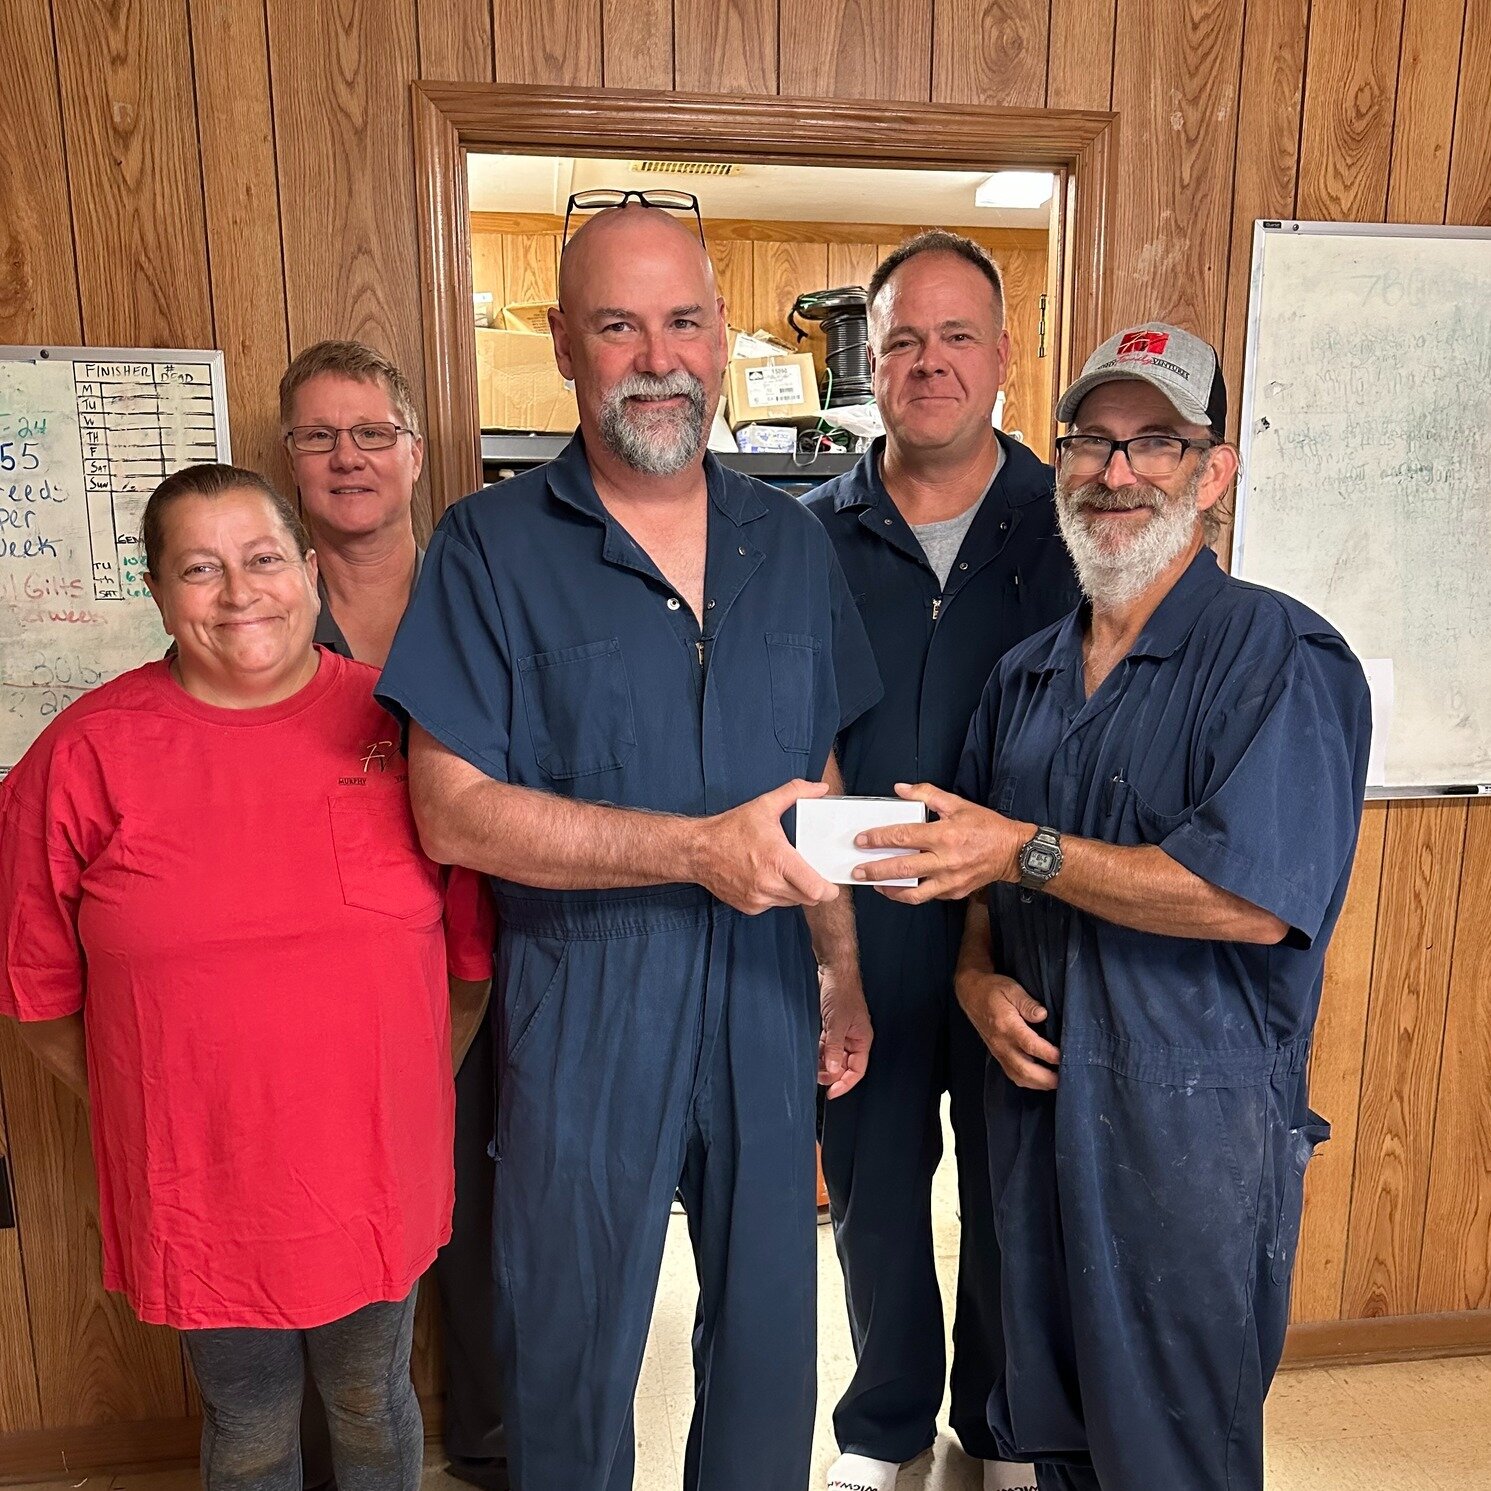 Congratulations to Ray Wheeler of NC Wolf Sow Farm who is celebrating 15 years with MFV! Standing with him (L to R) is Farm Manager Mary Brown, Production Manager Mark Spearman, Sr. Vice President and Director of Operations Terry Tate, and Sr, Produc